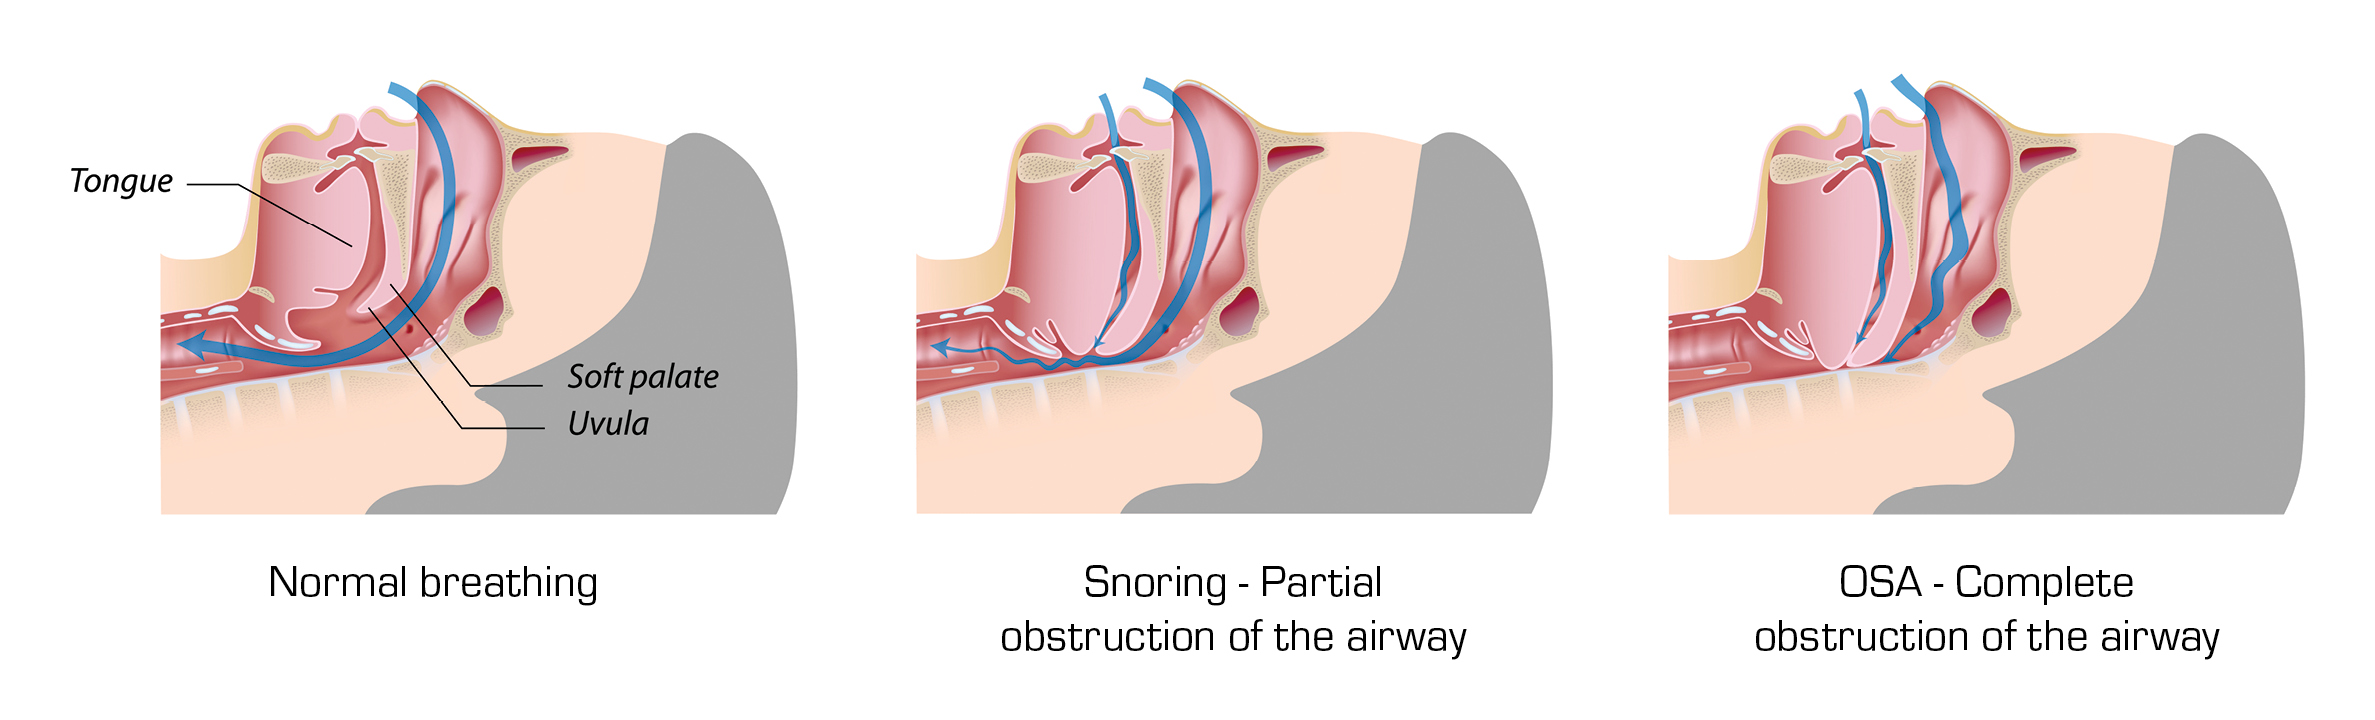 Diagram of snoring patterns: normal, snoring, and OSA